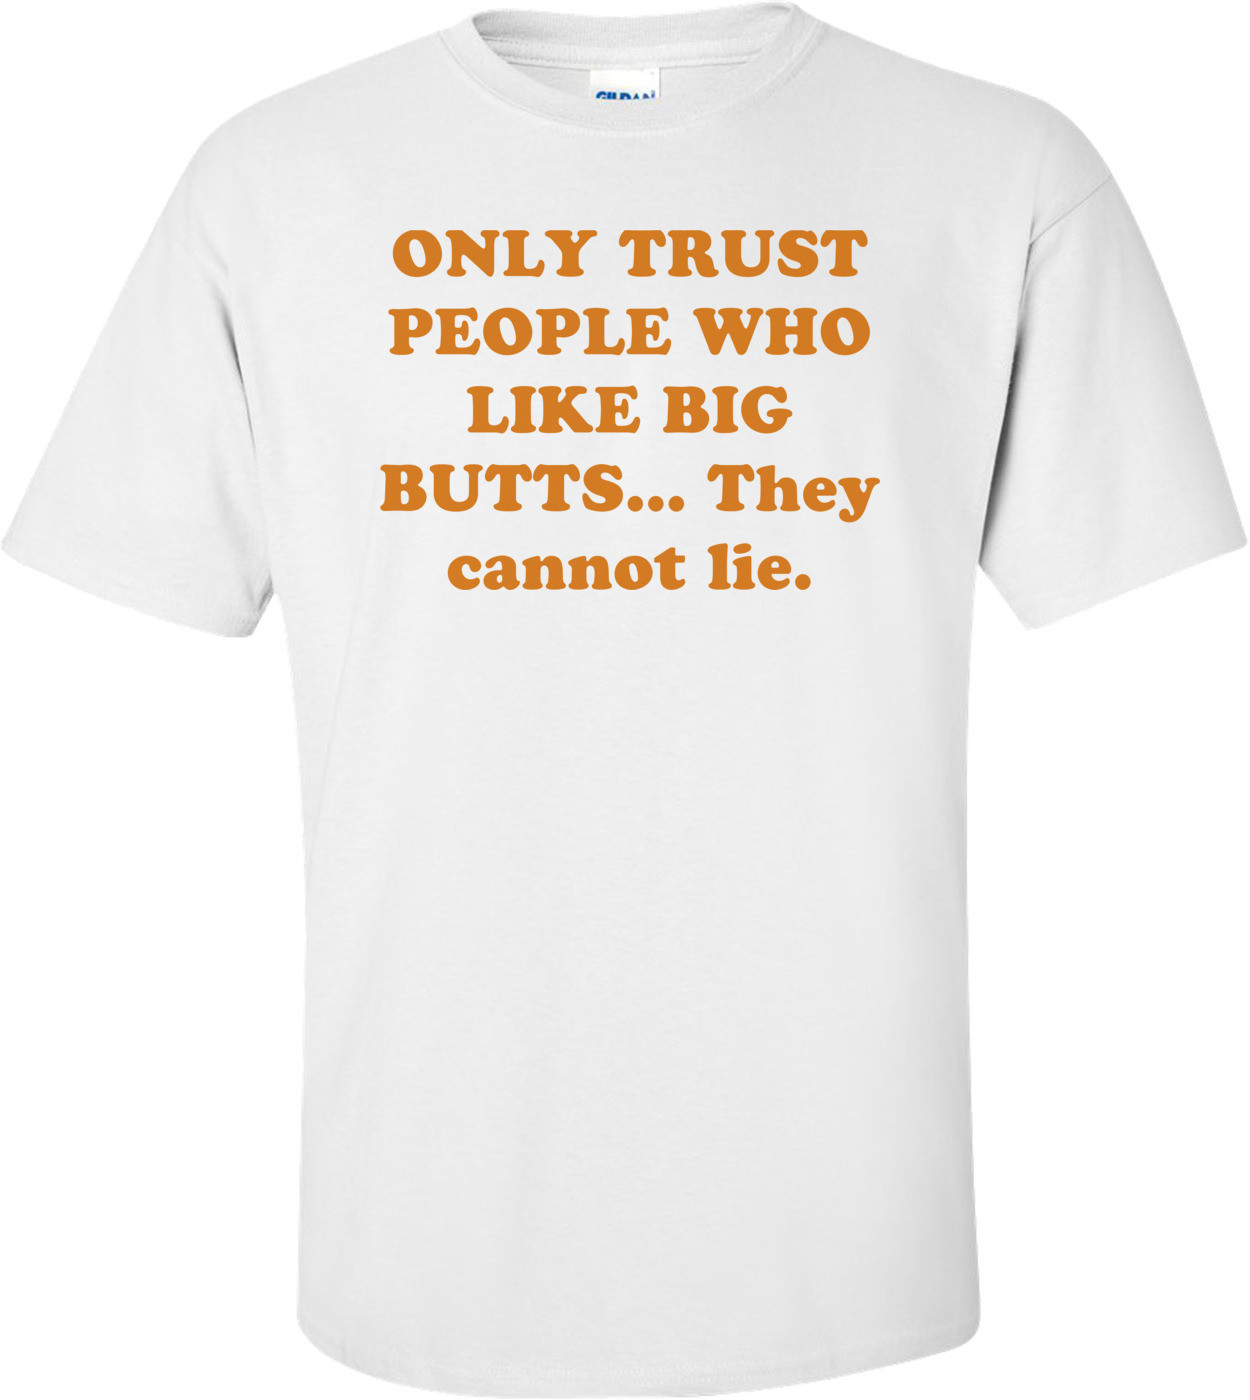 ONLY TRUST PEOPLE WHO LIKE BIG BUTTS... They cannot lie. Shirt